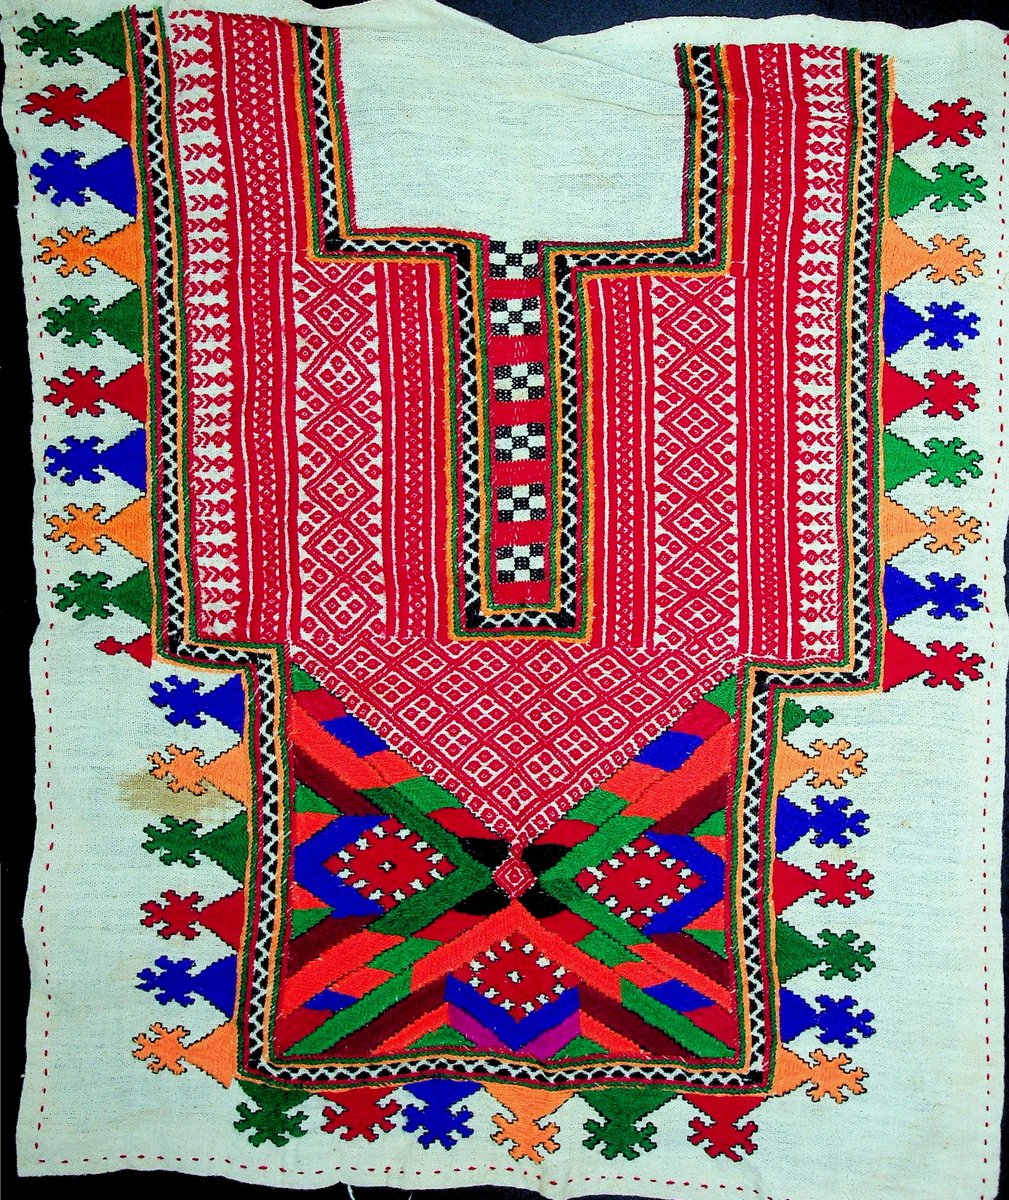 #MarriEmbroidery Needlework of Marri women is absolutely amazing. The needle passes through the #Weft and #Warp to create these amazing motifs with exceptional combination of colours with impeccable symmetry. Designs are passed from generation to generation and are the mind.